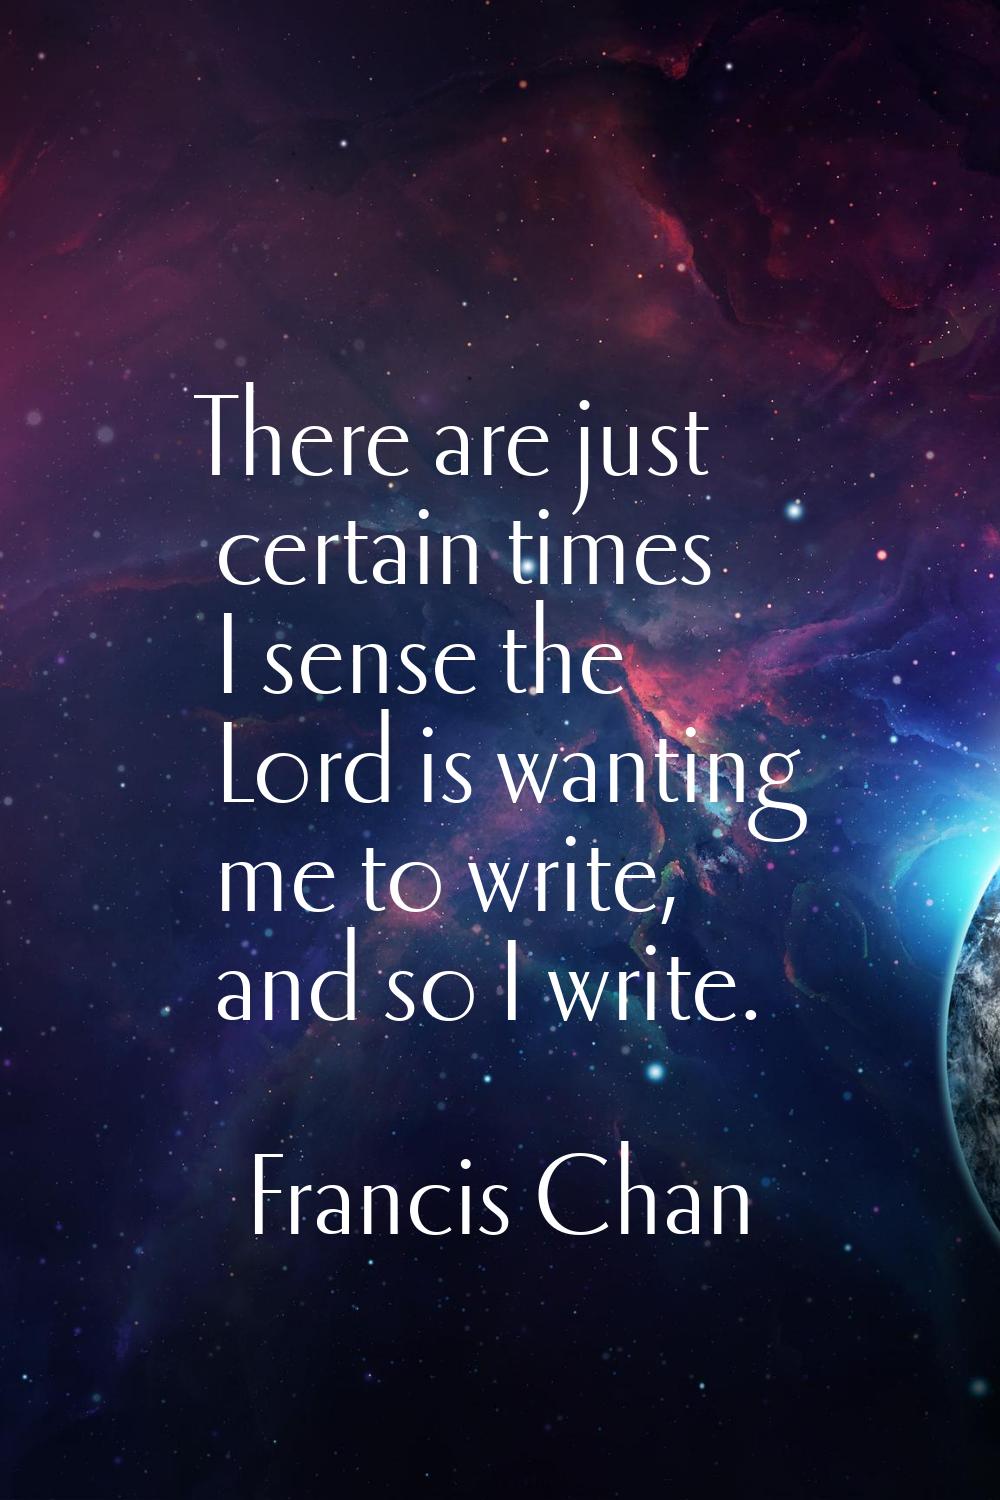 There are just certain times I sense the Lord is wanting me to write, and so I write.